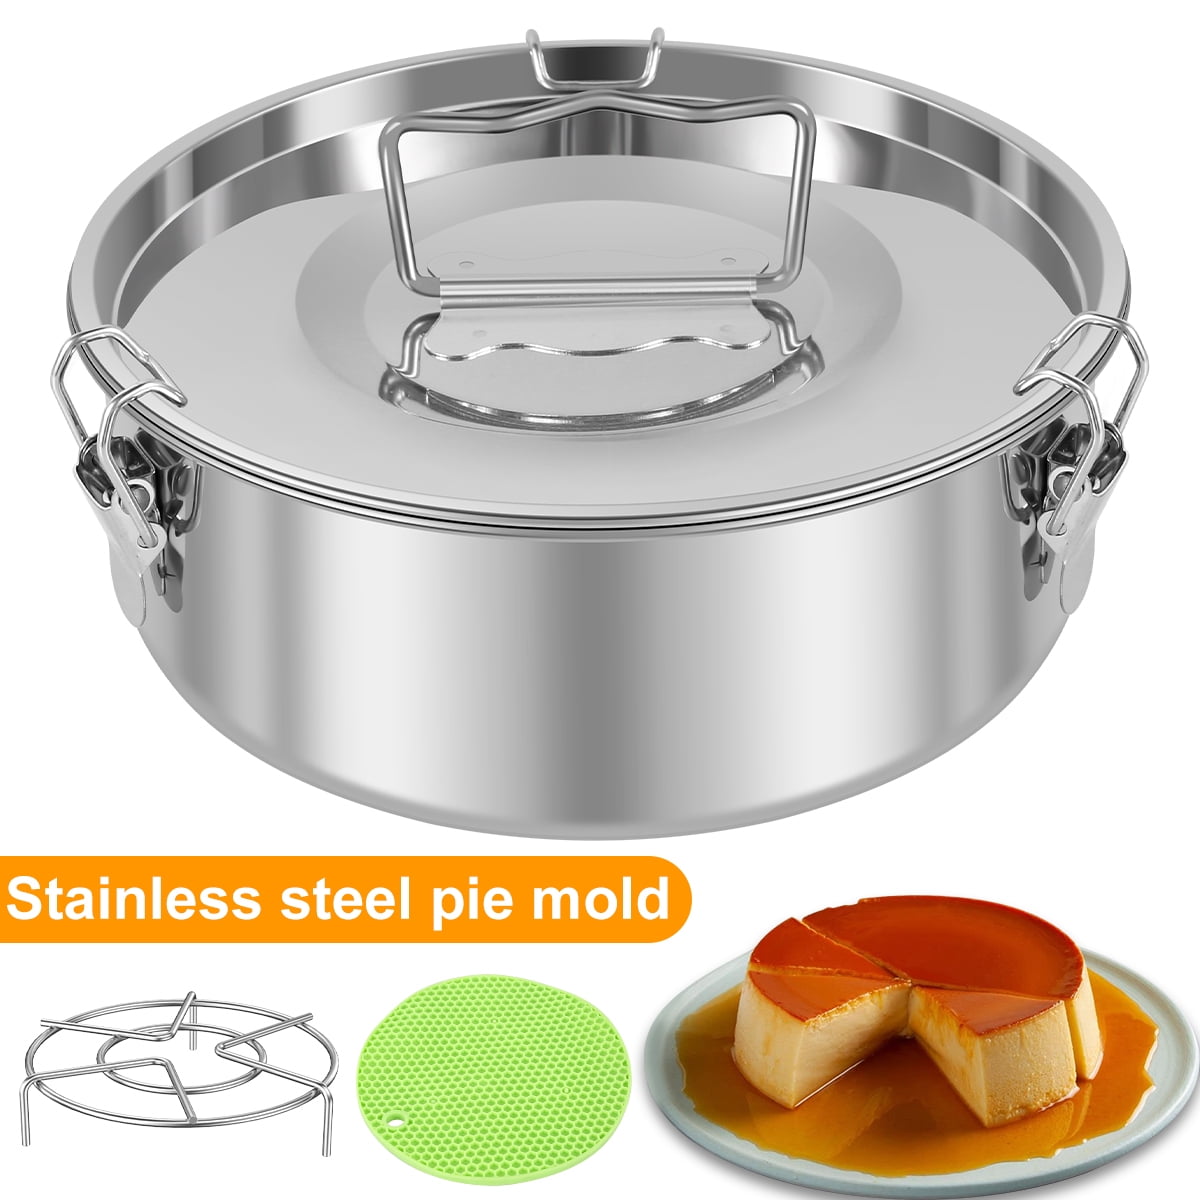 Hushee 2 Pieces Flan Pan Stainless Steel Flan Mold 7.5 x 2.95 Inch Round  Flan Maker Flan Baking Pan with Lids and 2 Spatulas for Baking Water Bath